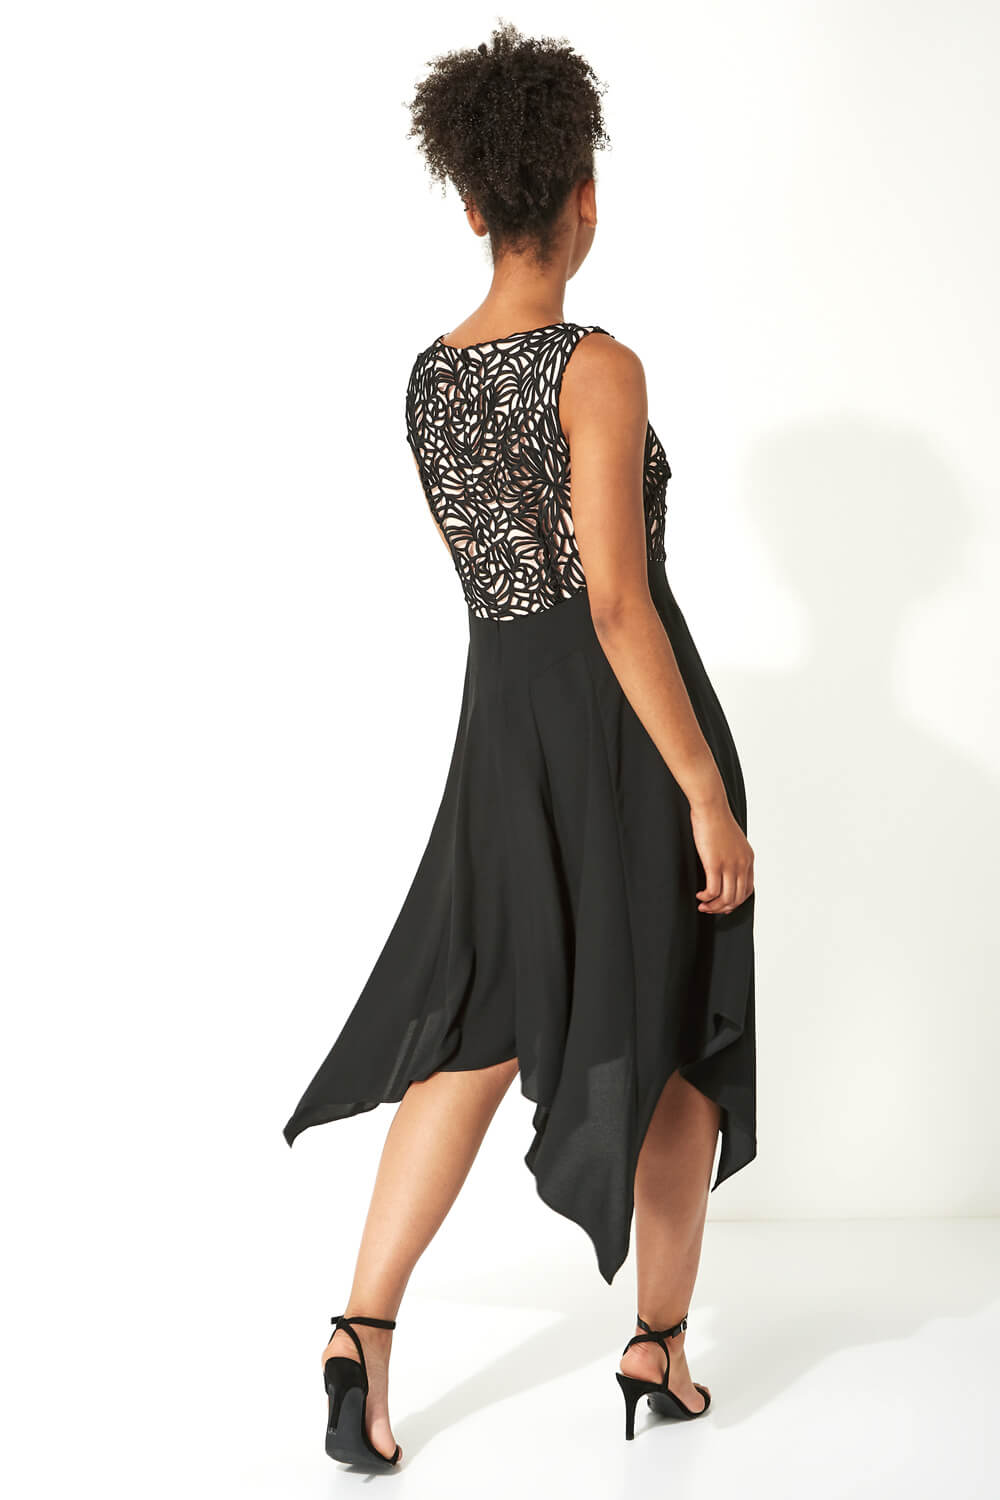 Black Hanky Hem Lace Fit and Flare Dress, Image 2 of 4